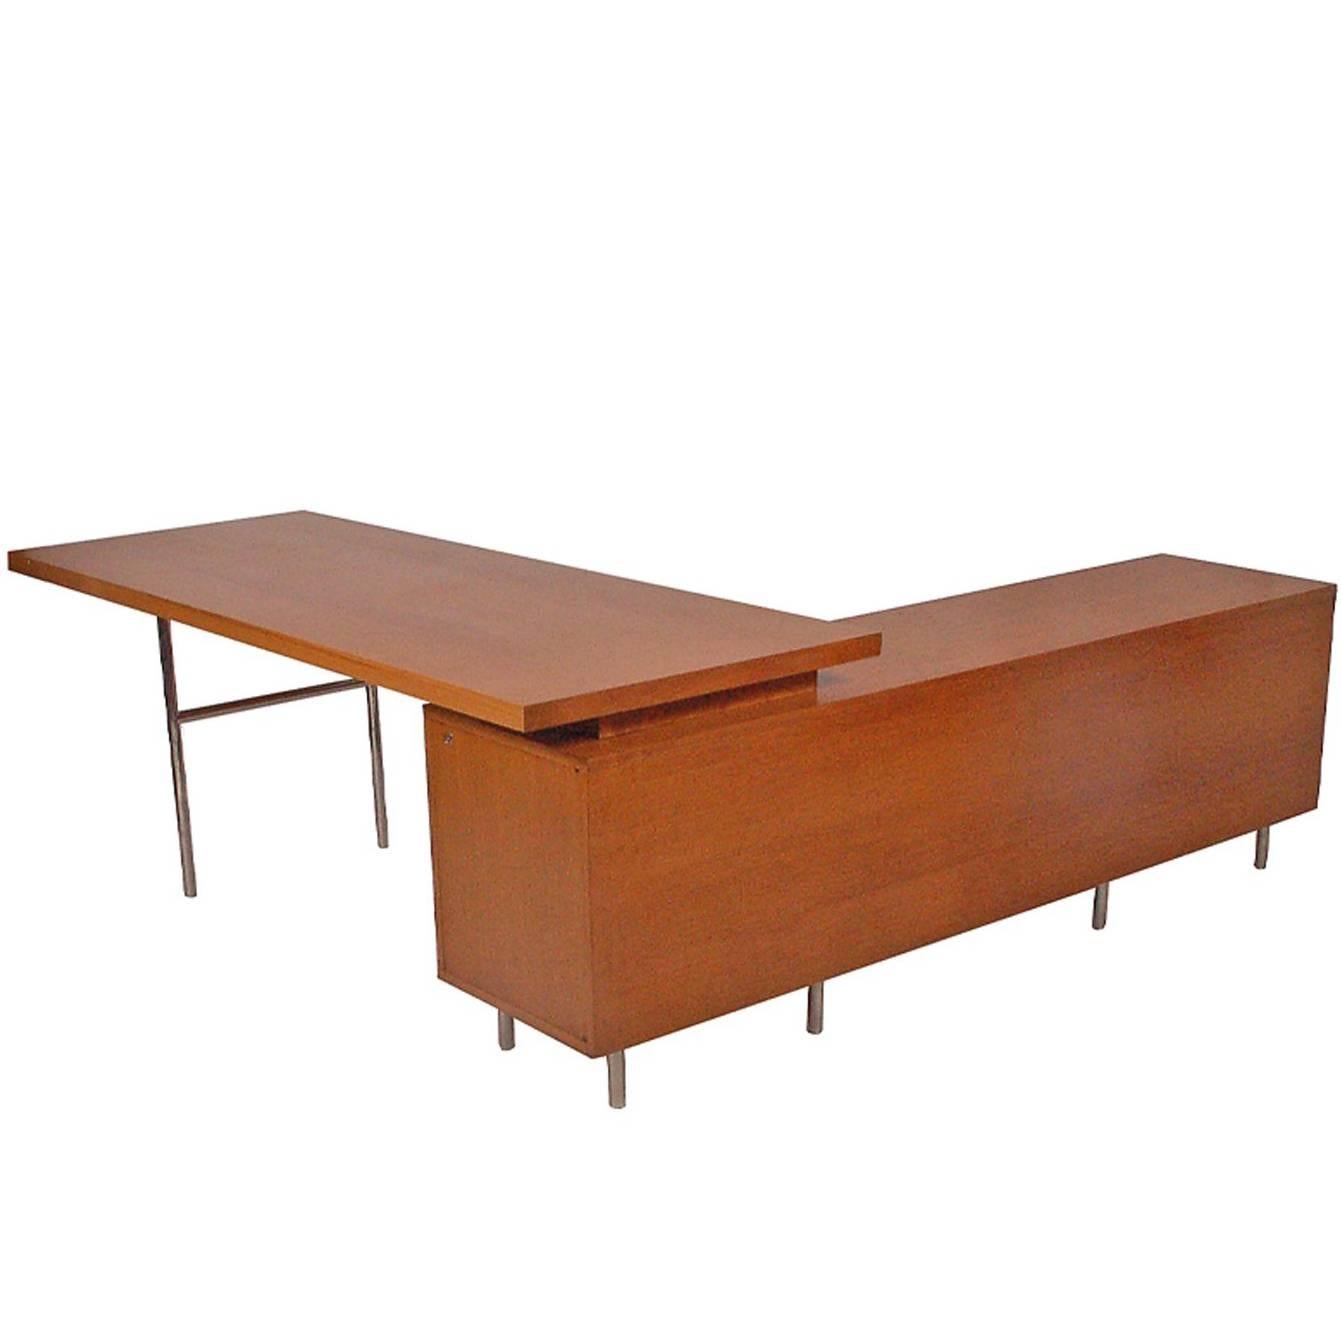 Executive Office Group Desk by George Nelson 1952 for Herman Miller